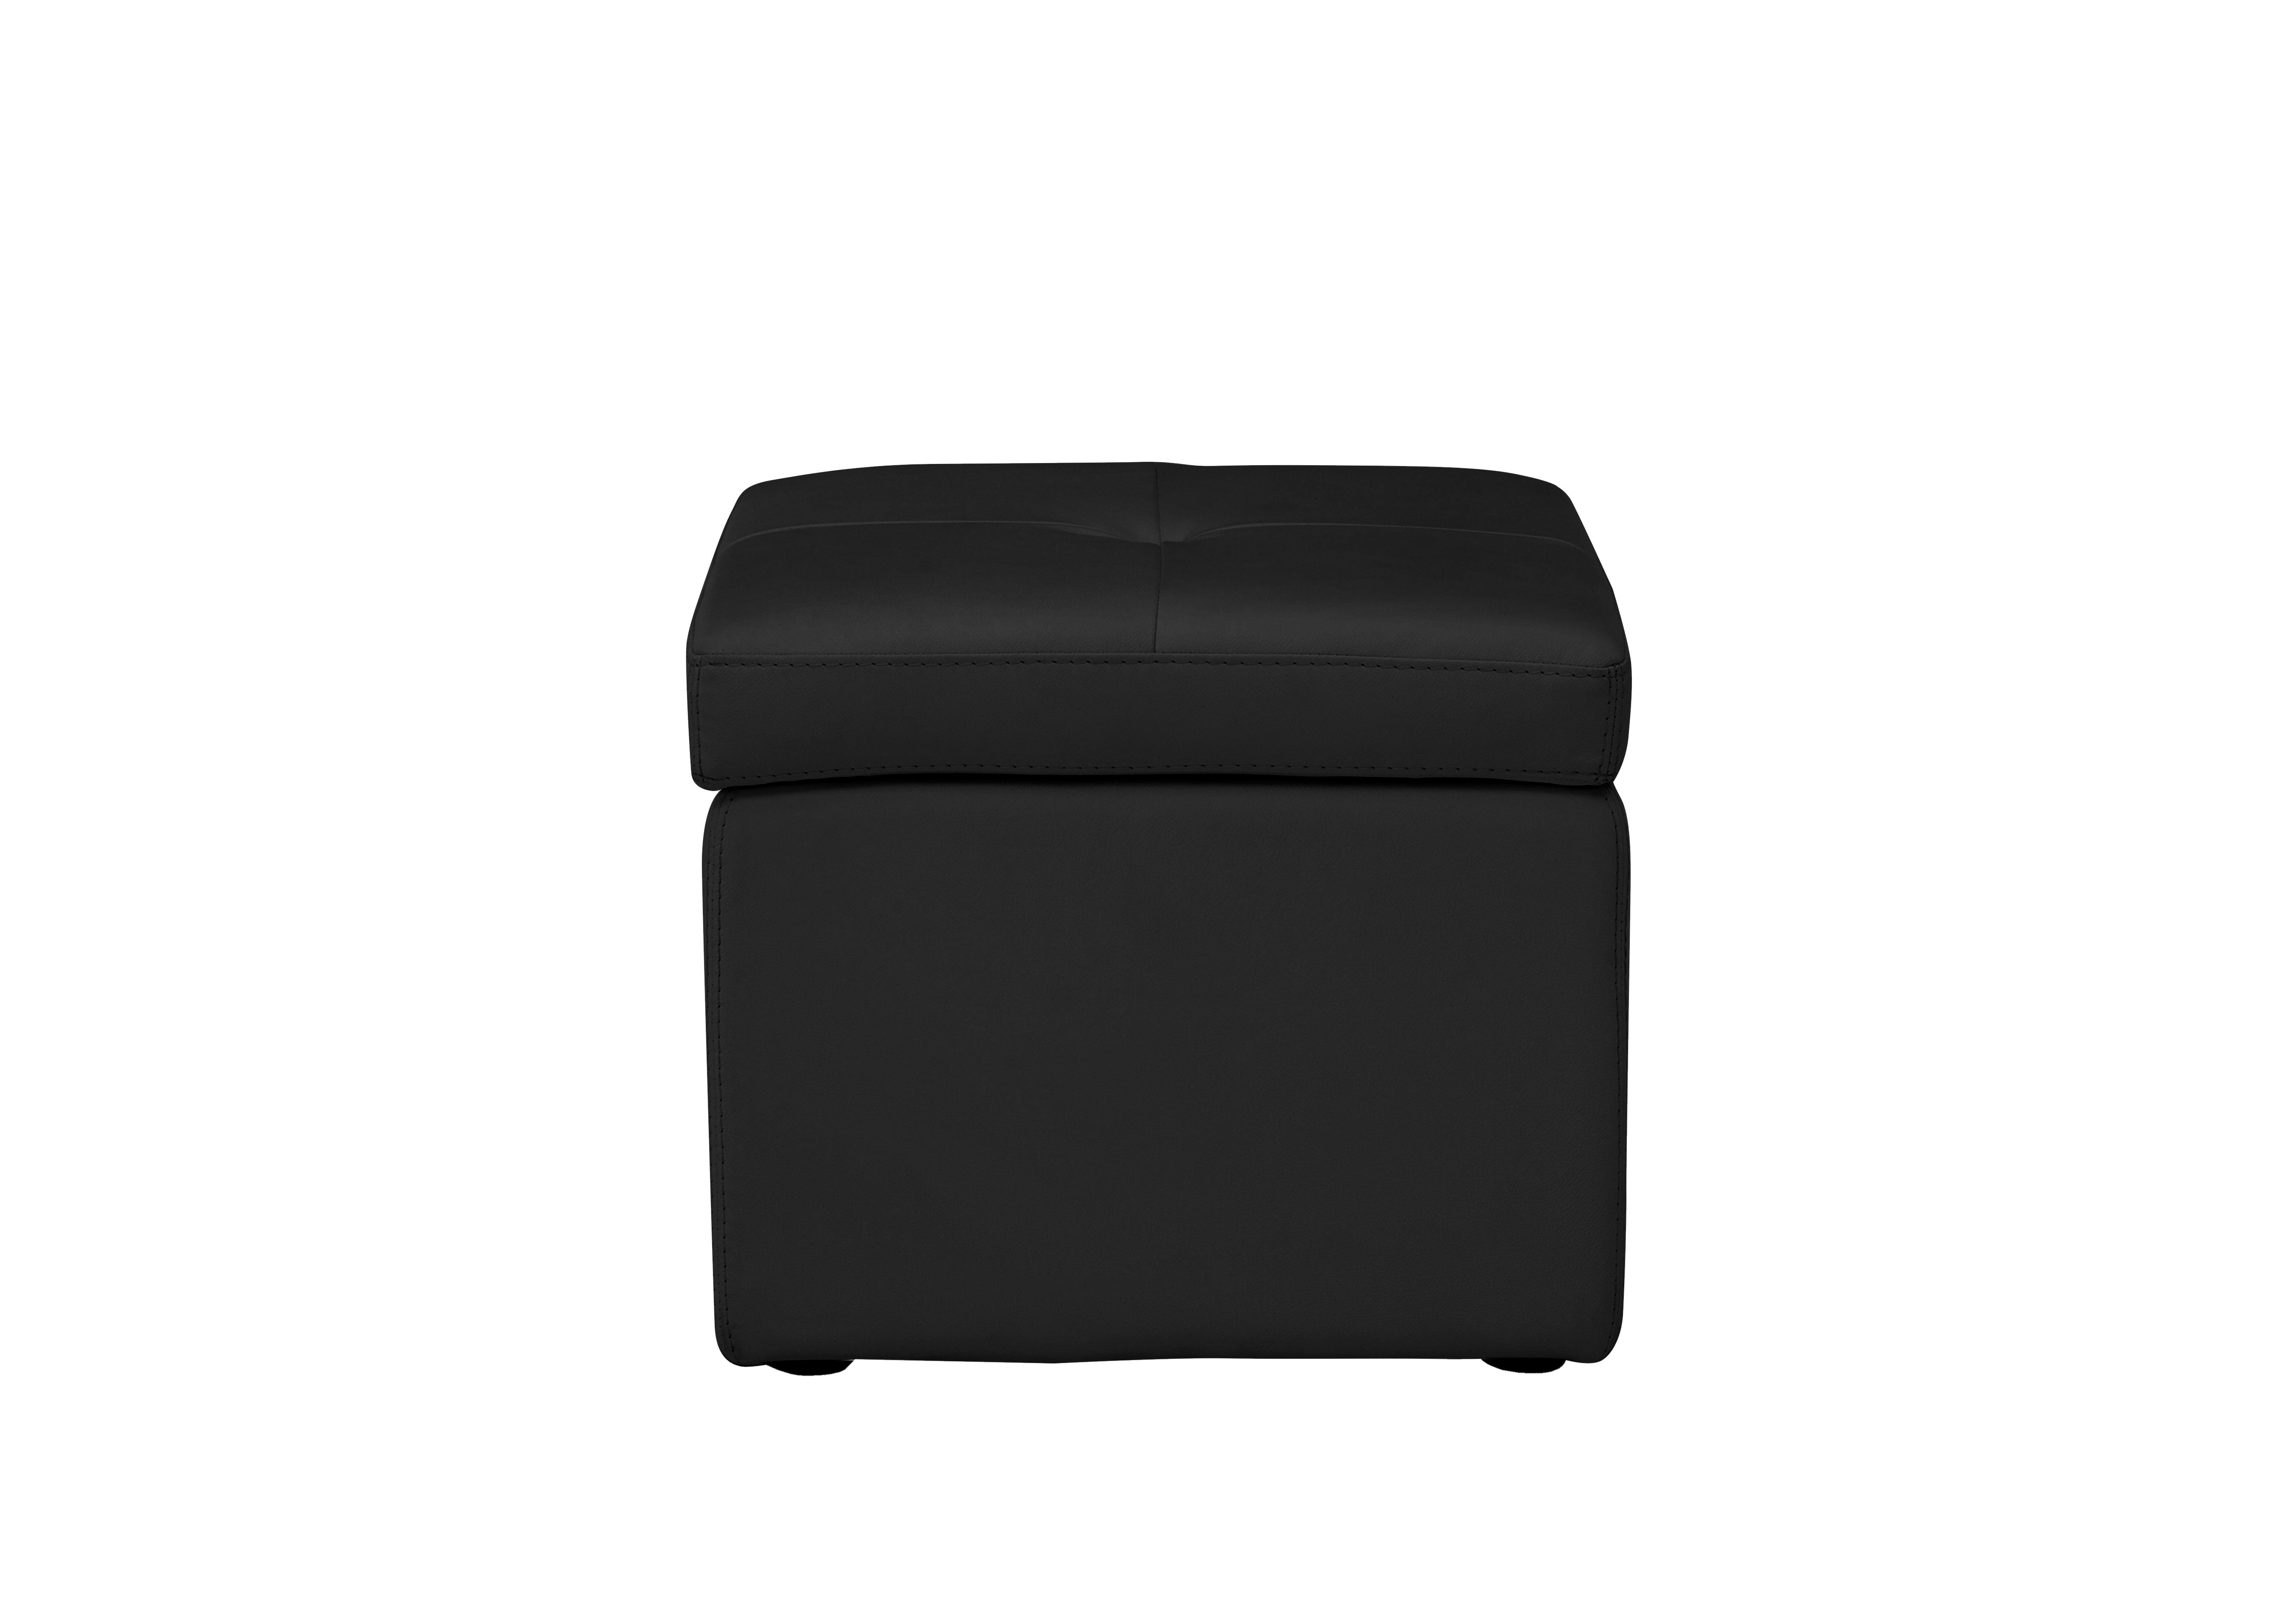 Easy Tray Leather Storage Footstool in Bv-3500 Classic Black on Furniture Village